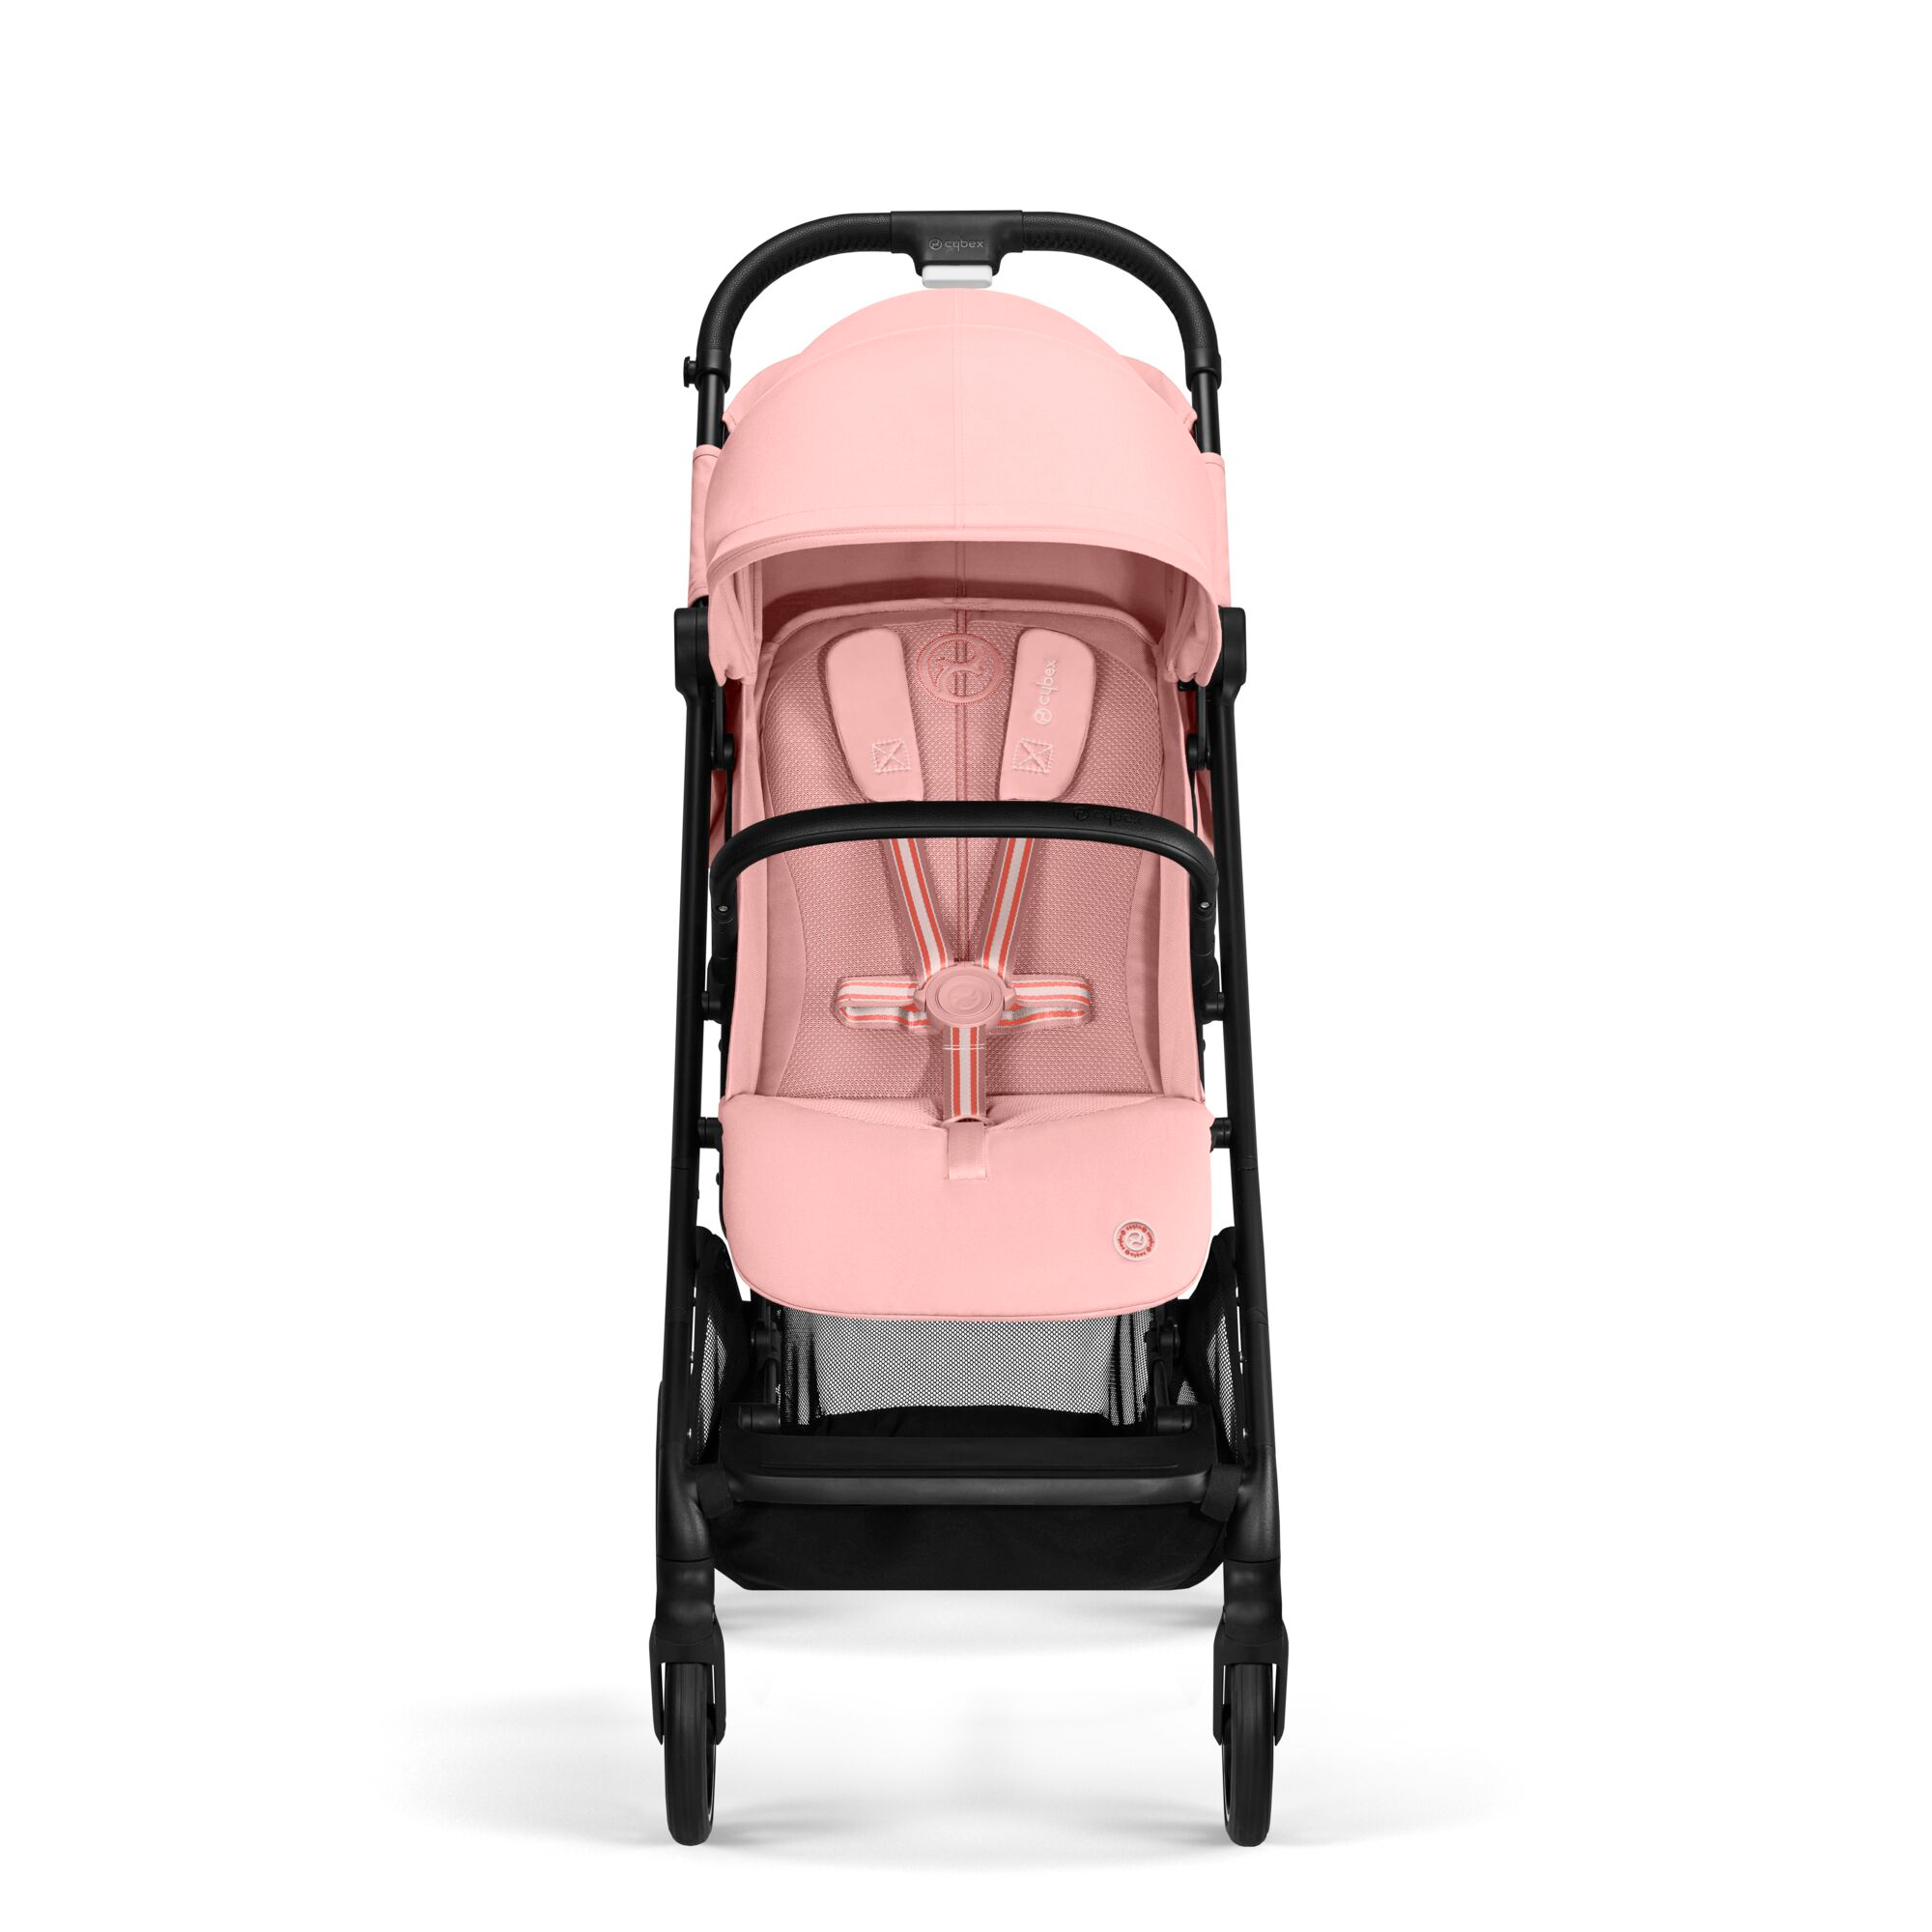 Beezy Candy Pink cybex Rosa 2000586434549 2